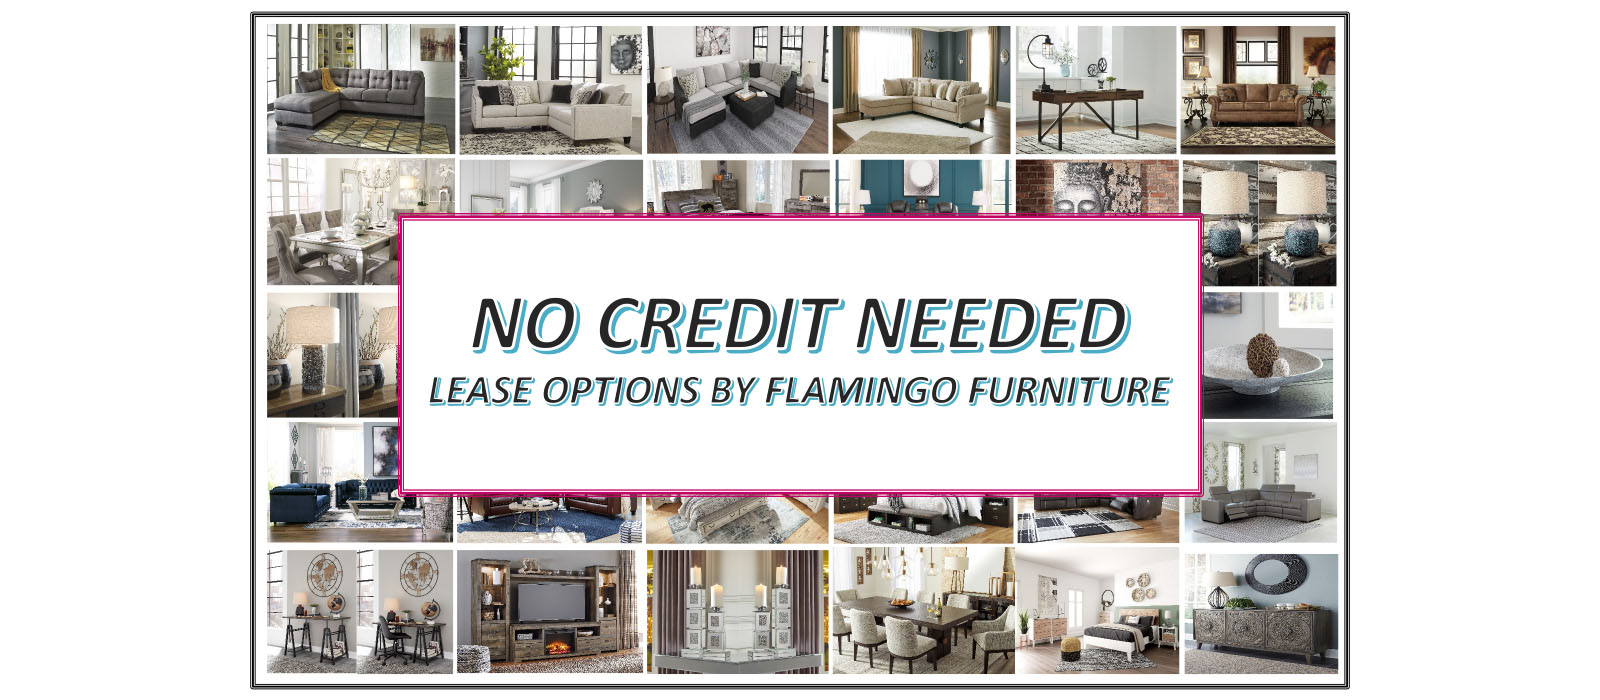 No Credit Needed - Lease Options by Flamingo Furniture